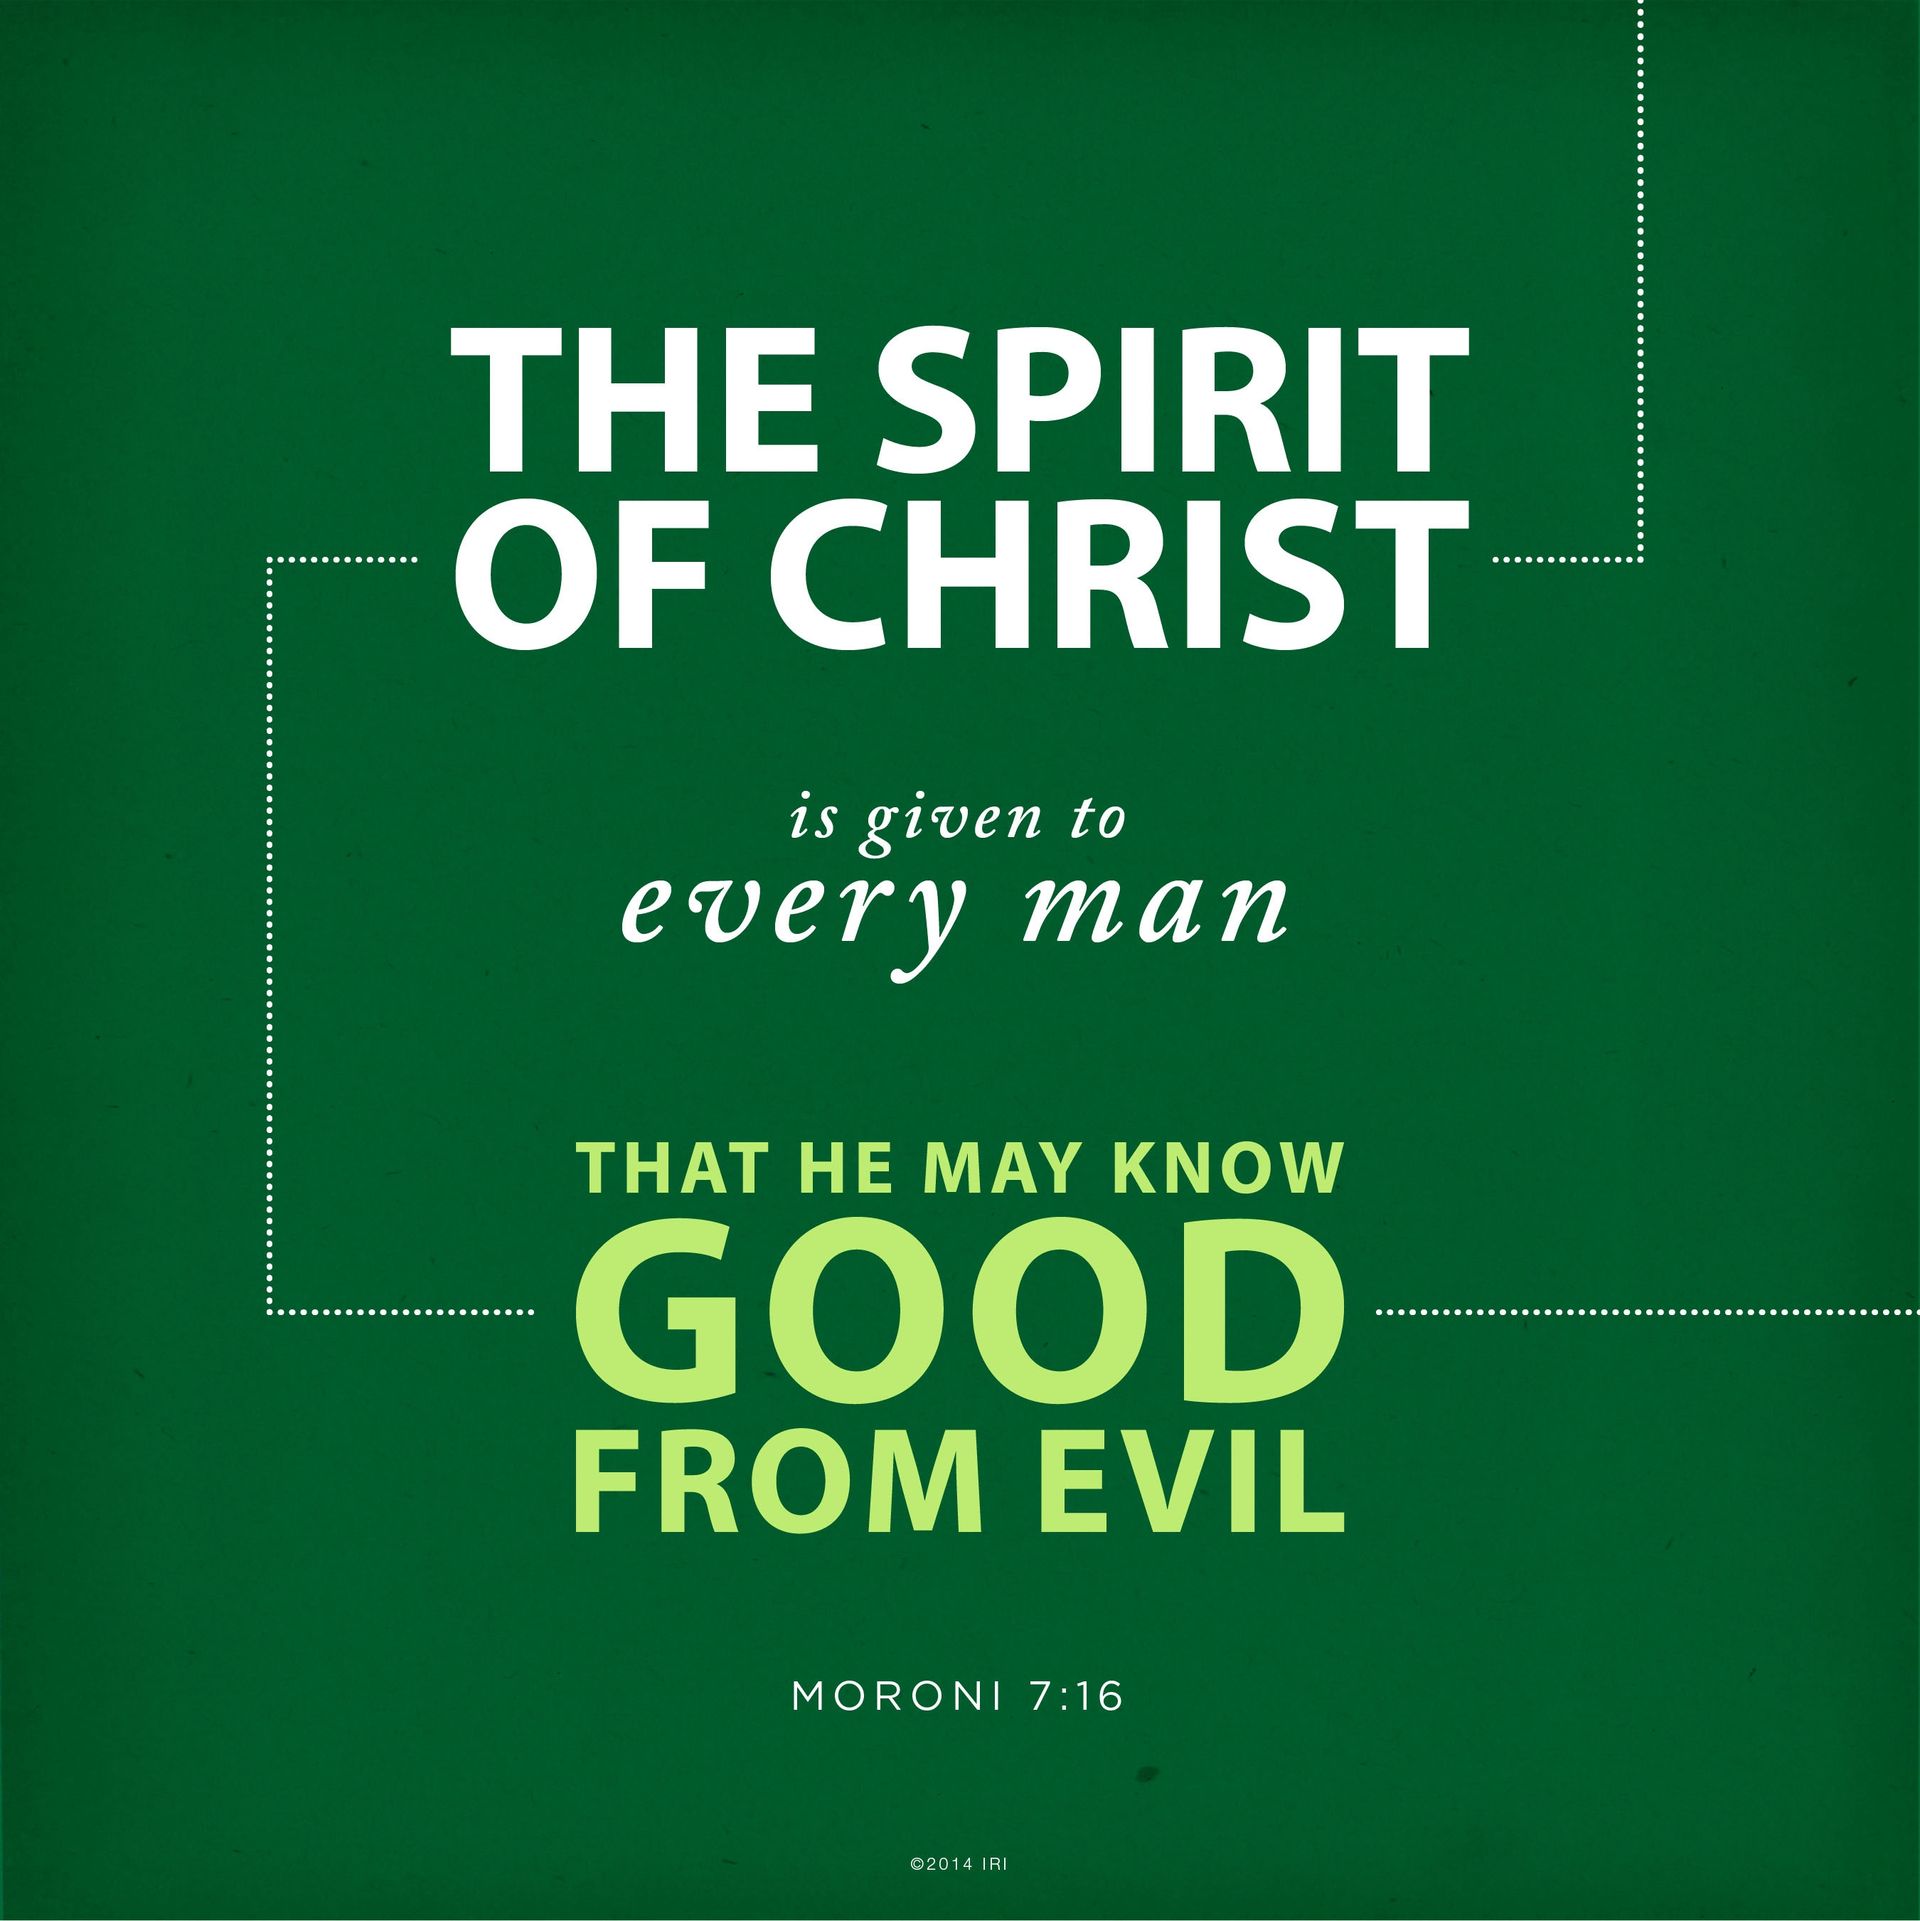 “The Spirit of Christ is given to every man, that he may know good from evil.”—Moroni 7:16